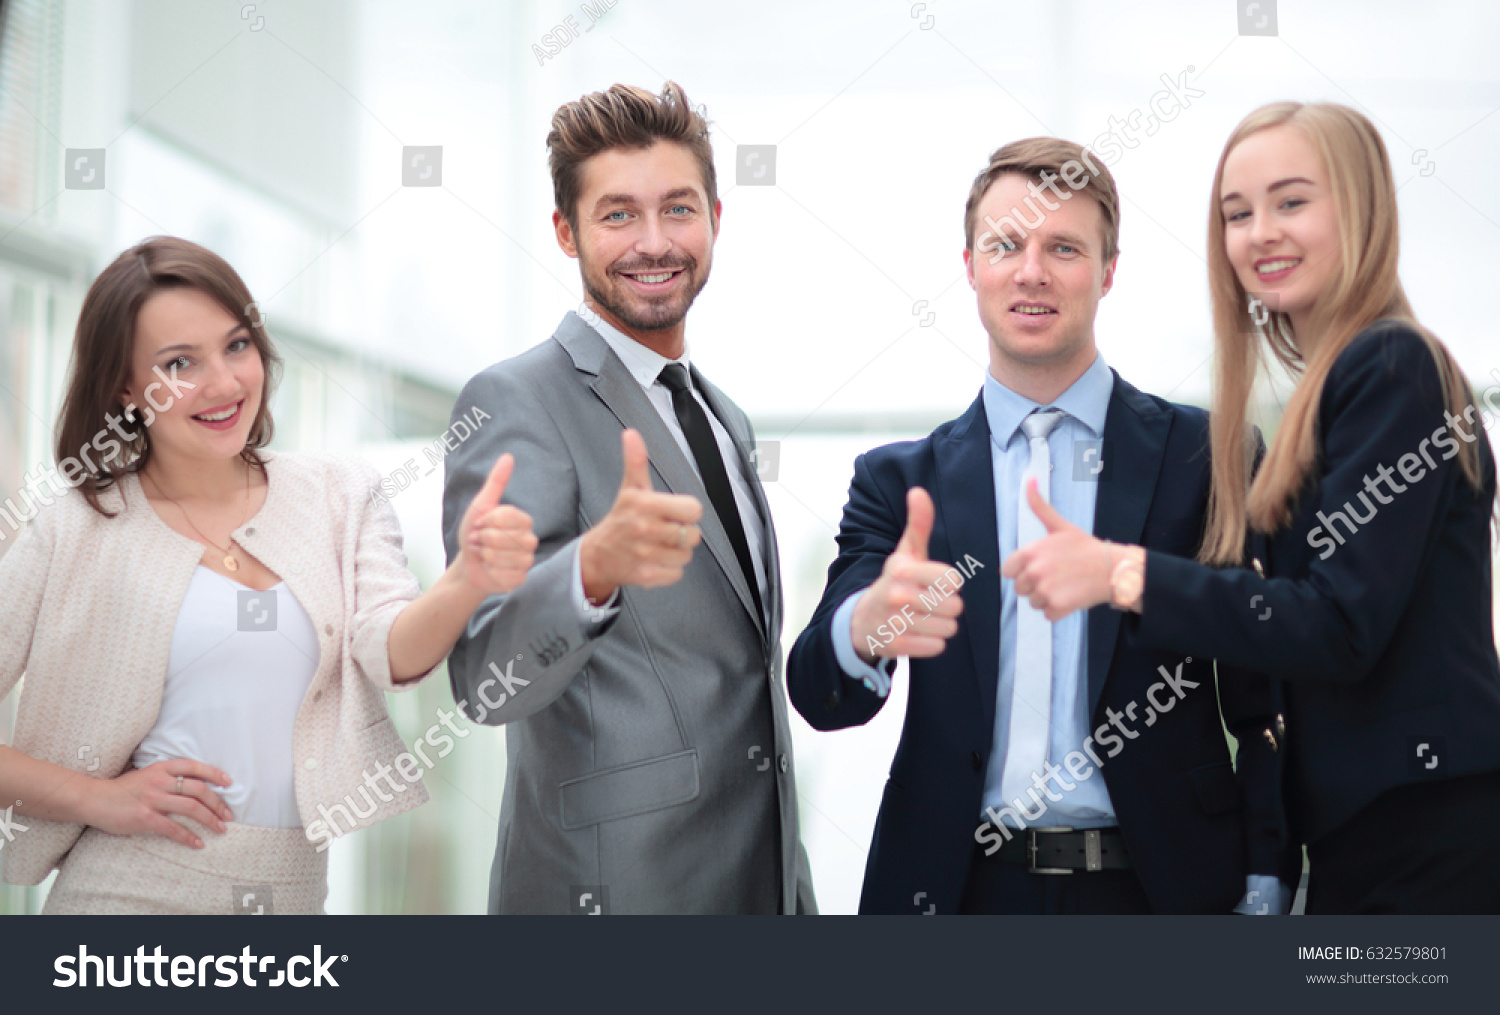 Business colleagues looking at camera and shoving thumbs up in t #632579801